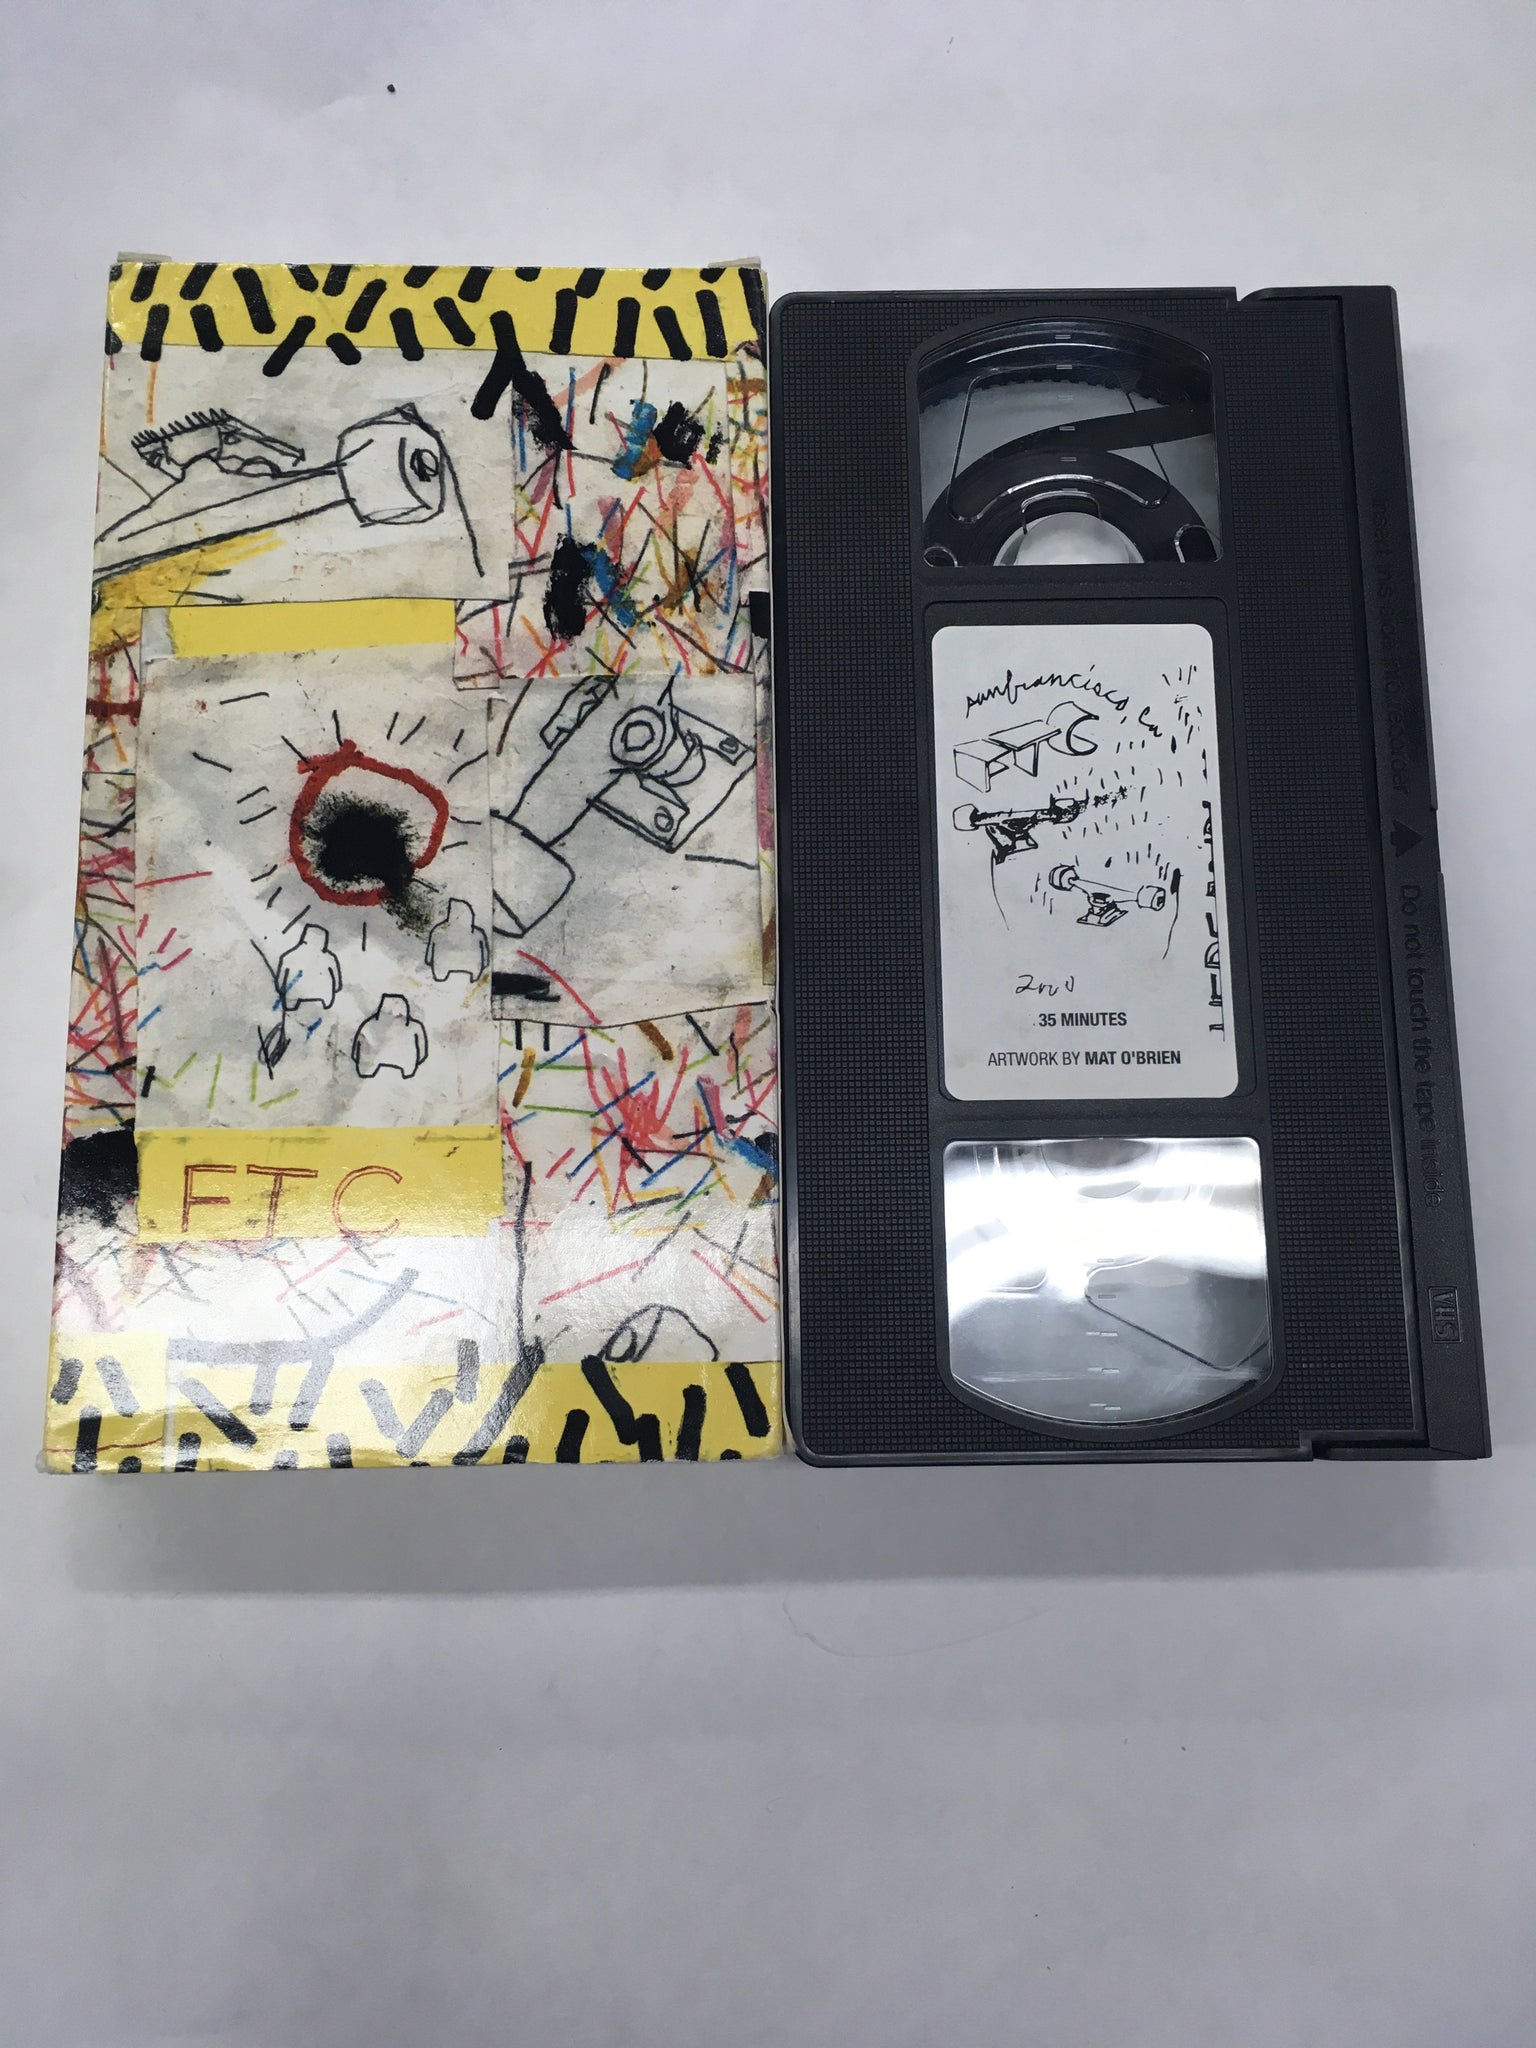 FTC VHS Tape SIGNED BY KARL WATSON